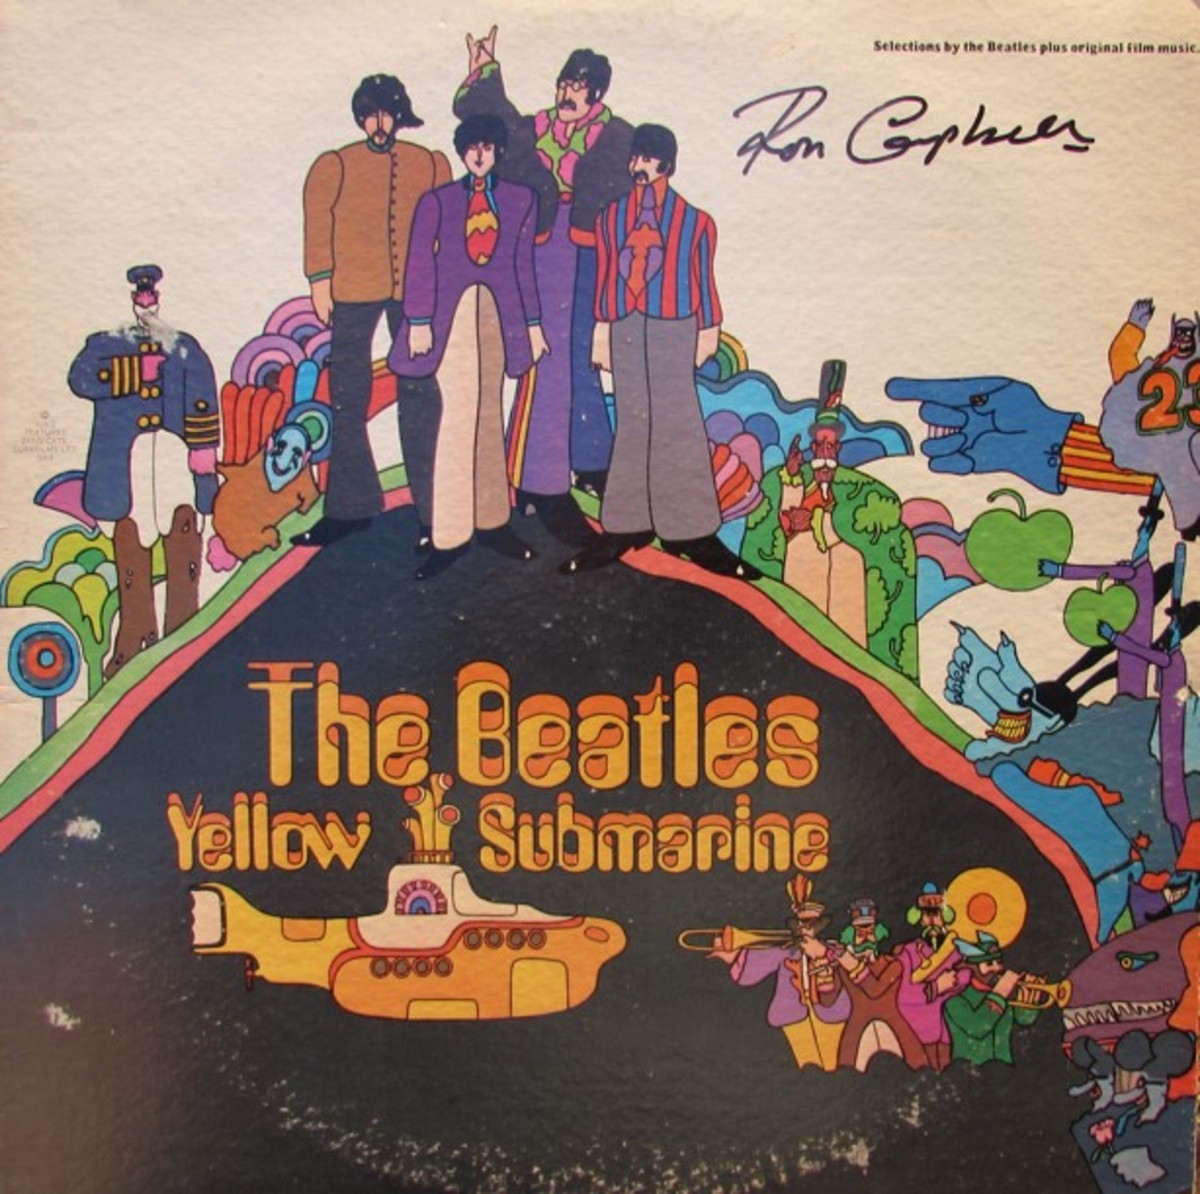 1969 soundtrack album autographed by Ron Campbell in 2011